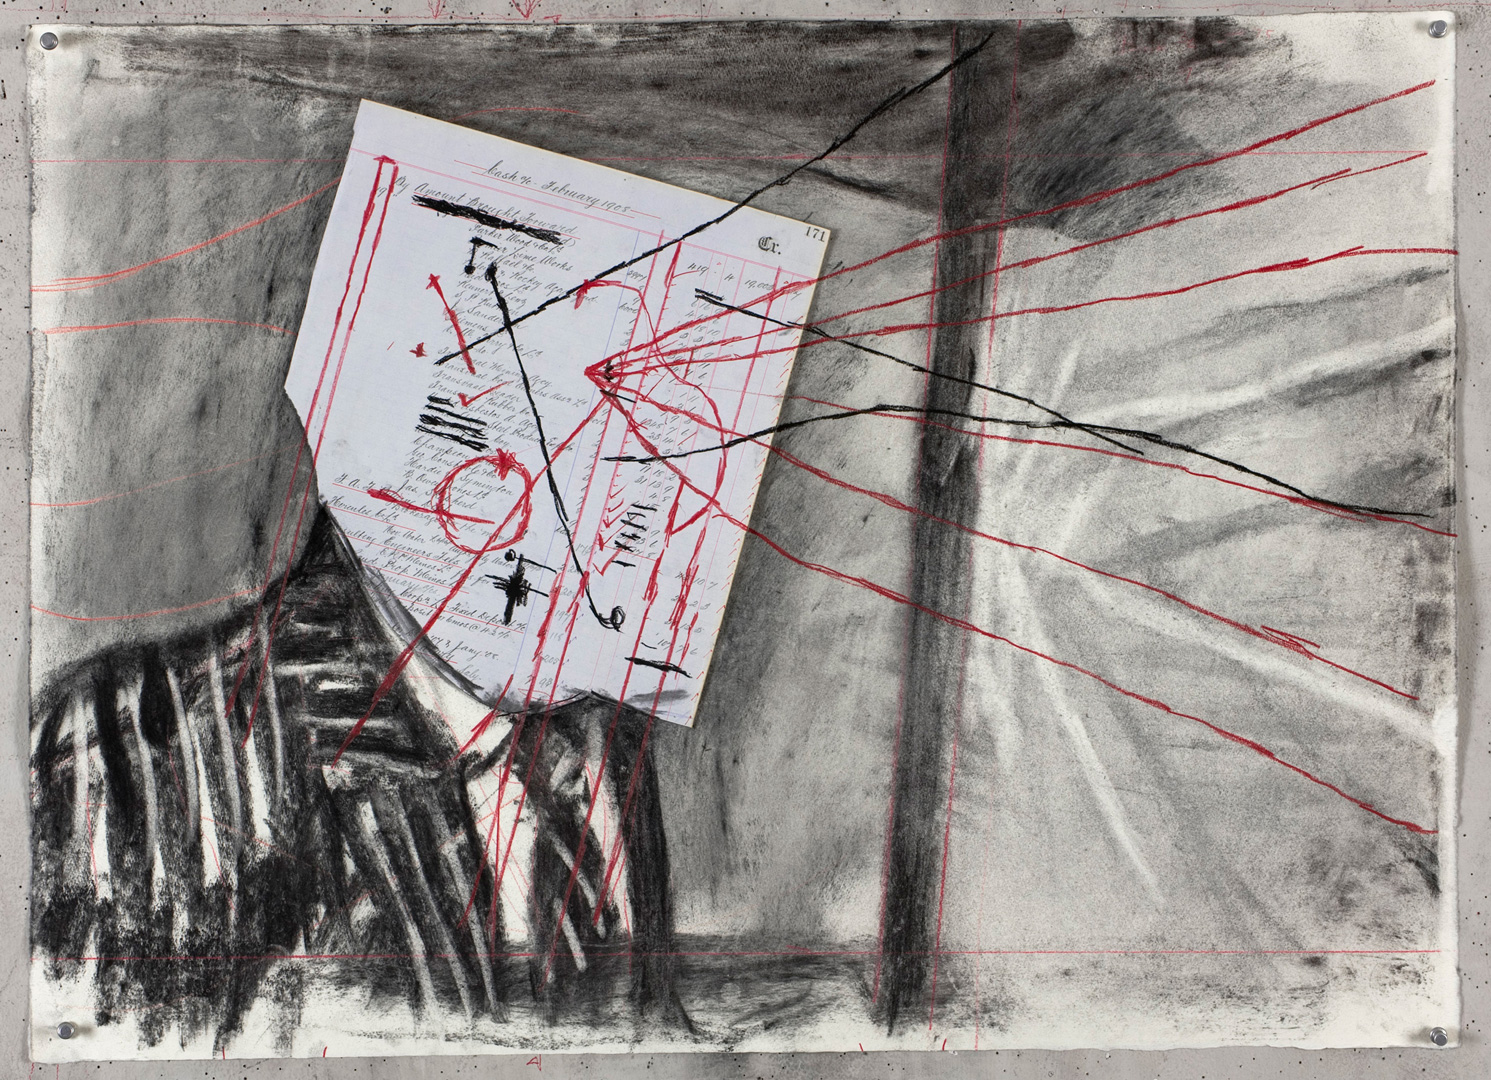 William Kentridge - Drawing for 'Other Faces', 2011, charcoal, colored pencil and found ledger paper on paper